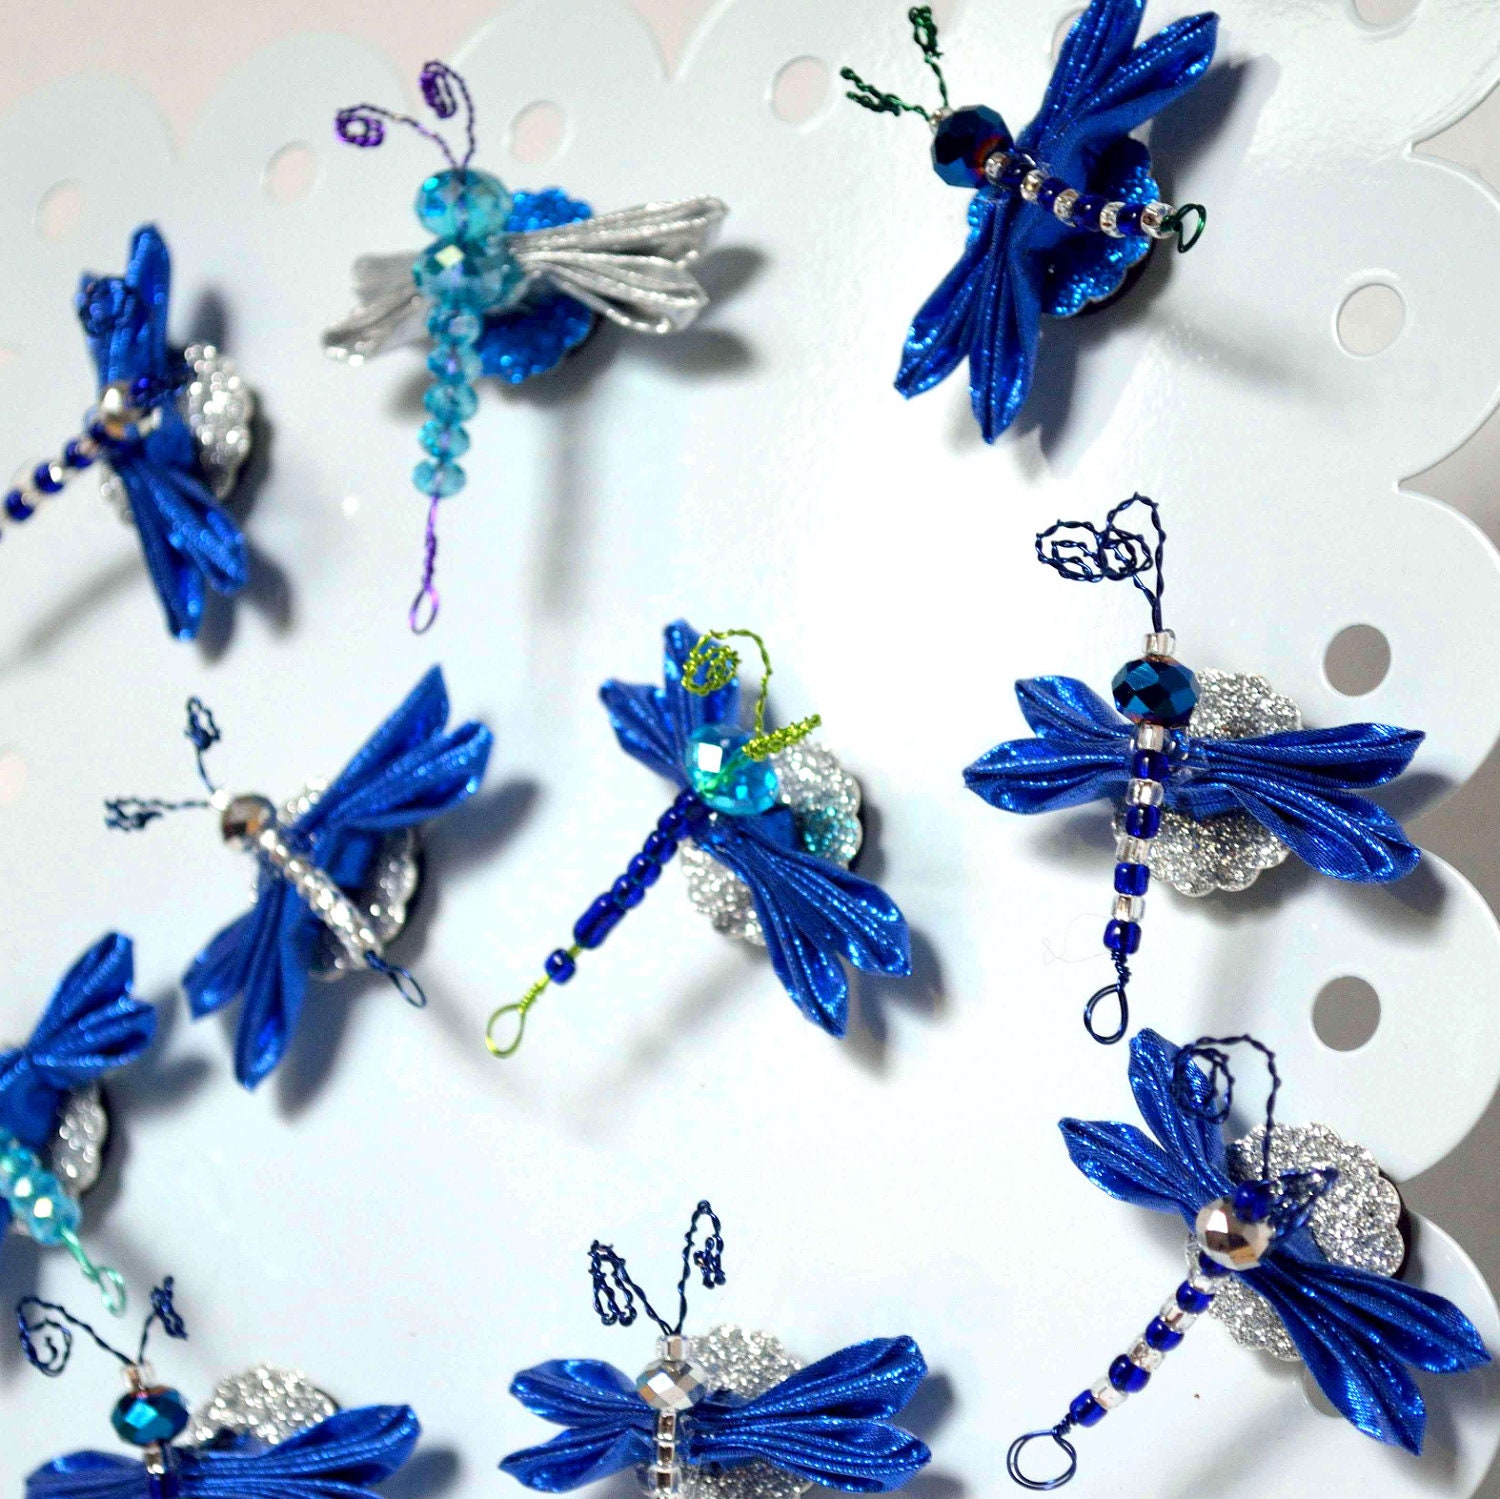 Holiday Bugs Hanukkah Bugs Blue Silver Kanzashi Dragonfly Magnets M201 - fostersbeauties